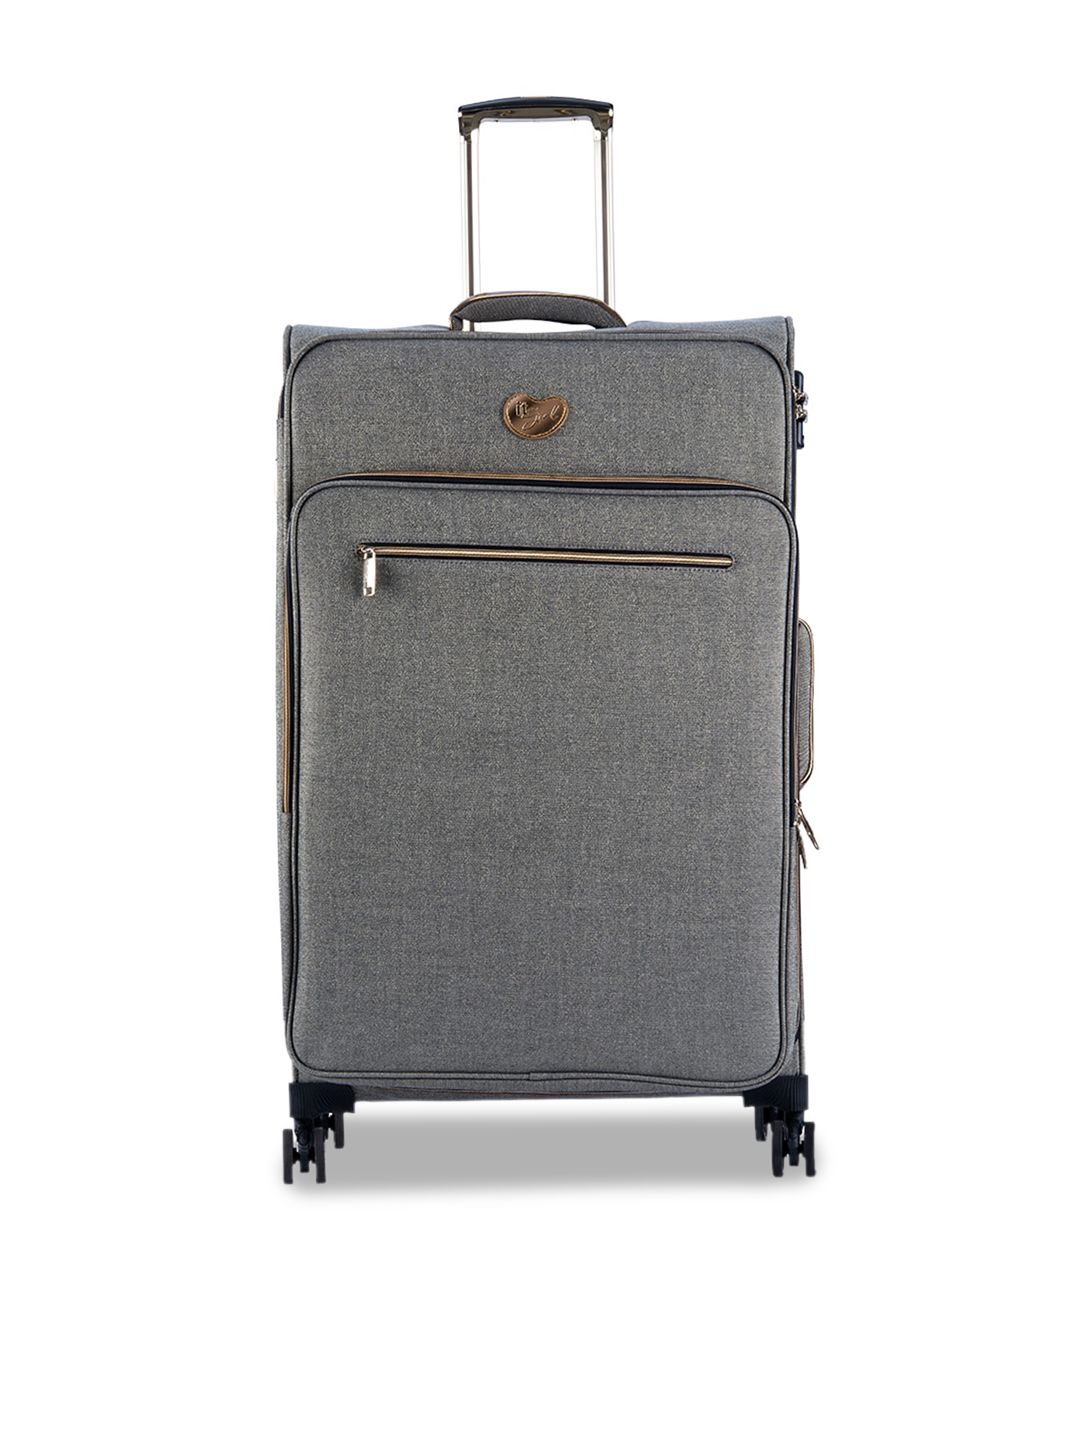 IT luggage Grey Solid Soft-Sided Large Glisten Trolley Suitcase Price in India